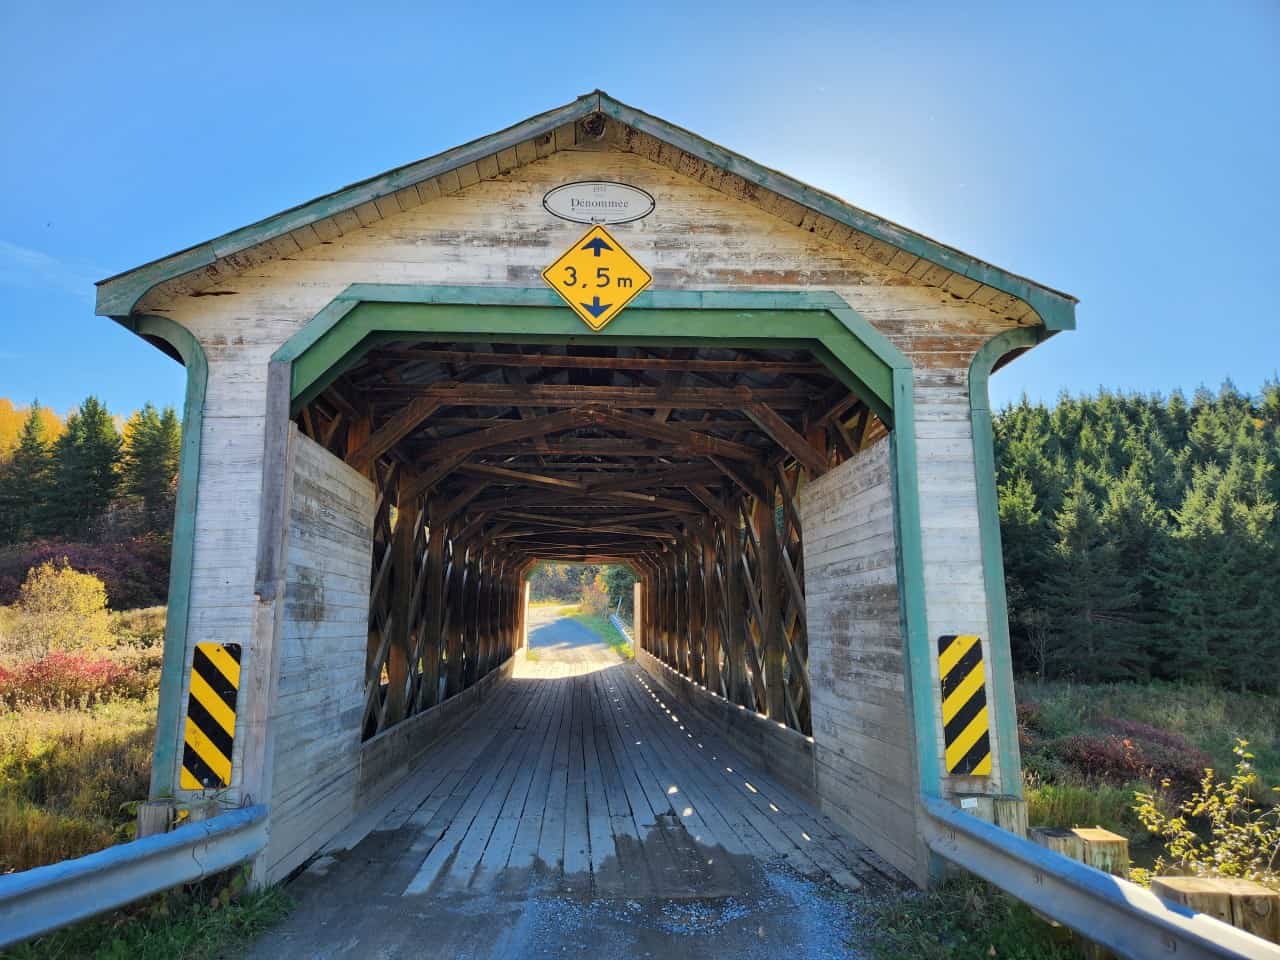 1933 Denommee Covered Bridge in Quebec - I love bridges, especially old wood covered ones. This piece of history was built in 1933 and is still used today, except it is closed during the winter months. There used to be over 30 covered bridges in this area, but less than half remain standing 